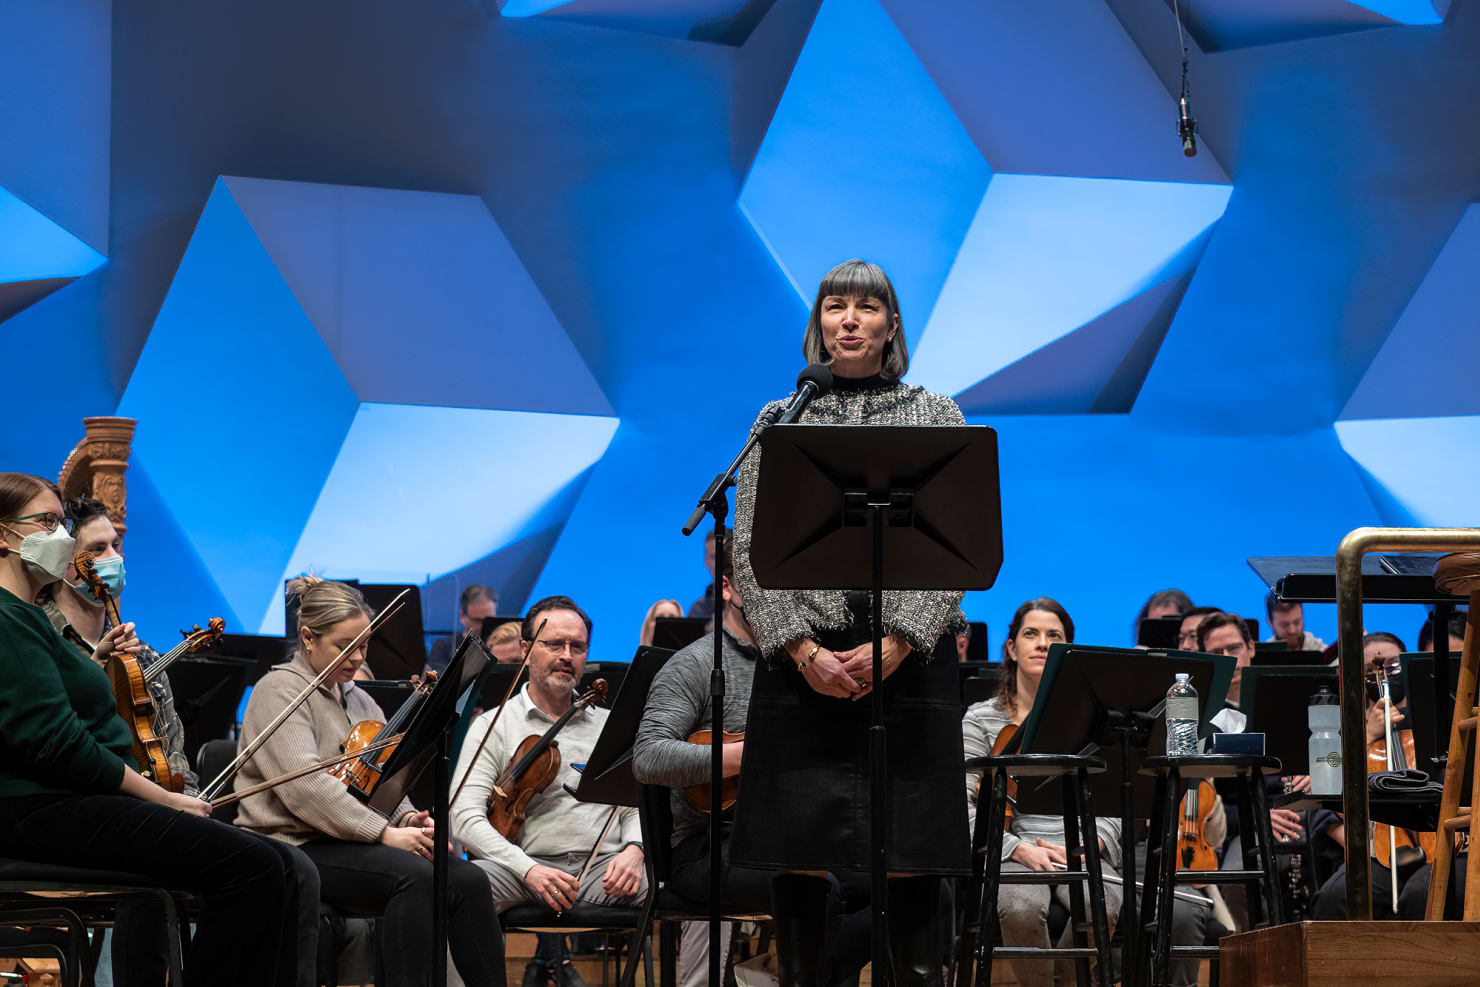 Michelle Miller Burns stands in front of the Orchestra on stage at Orchestra Hall